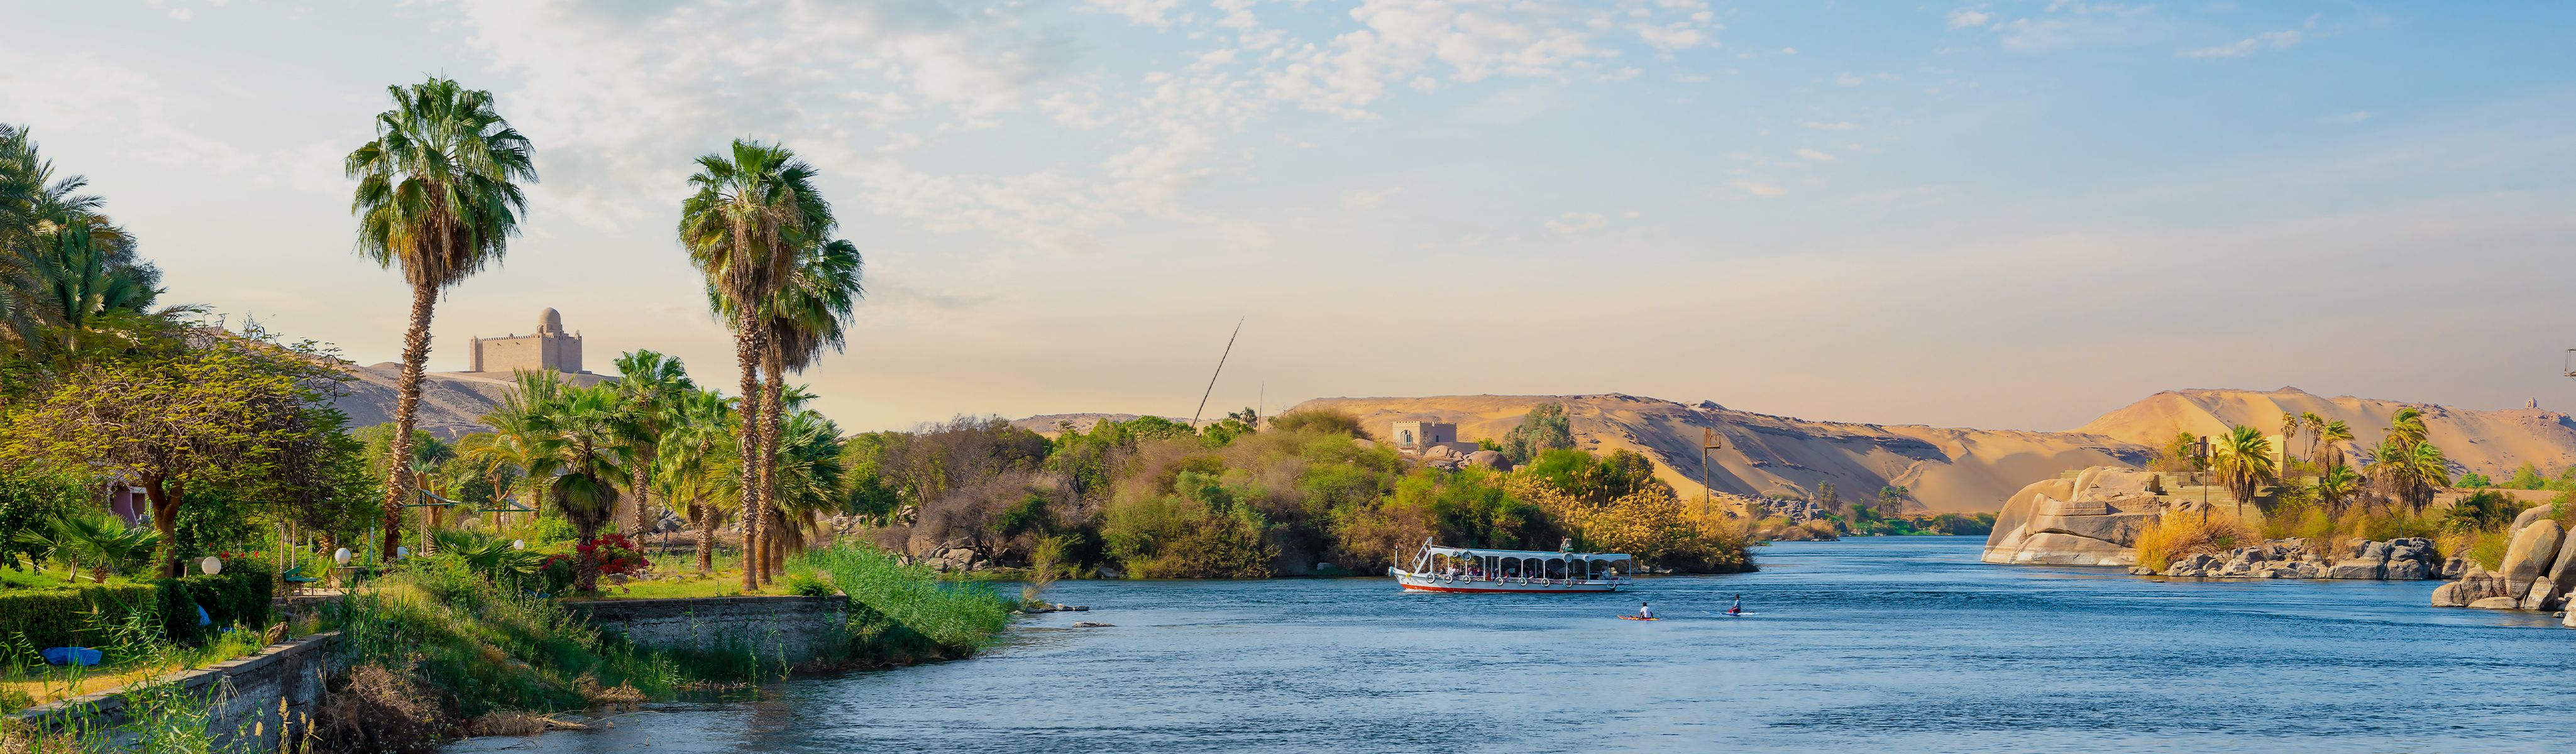 nile city for tourism and hotels